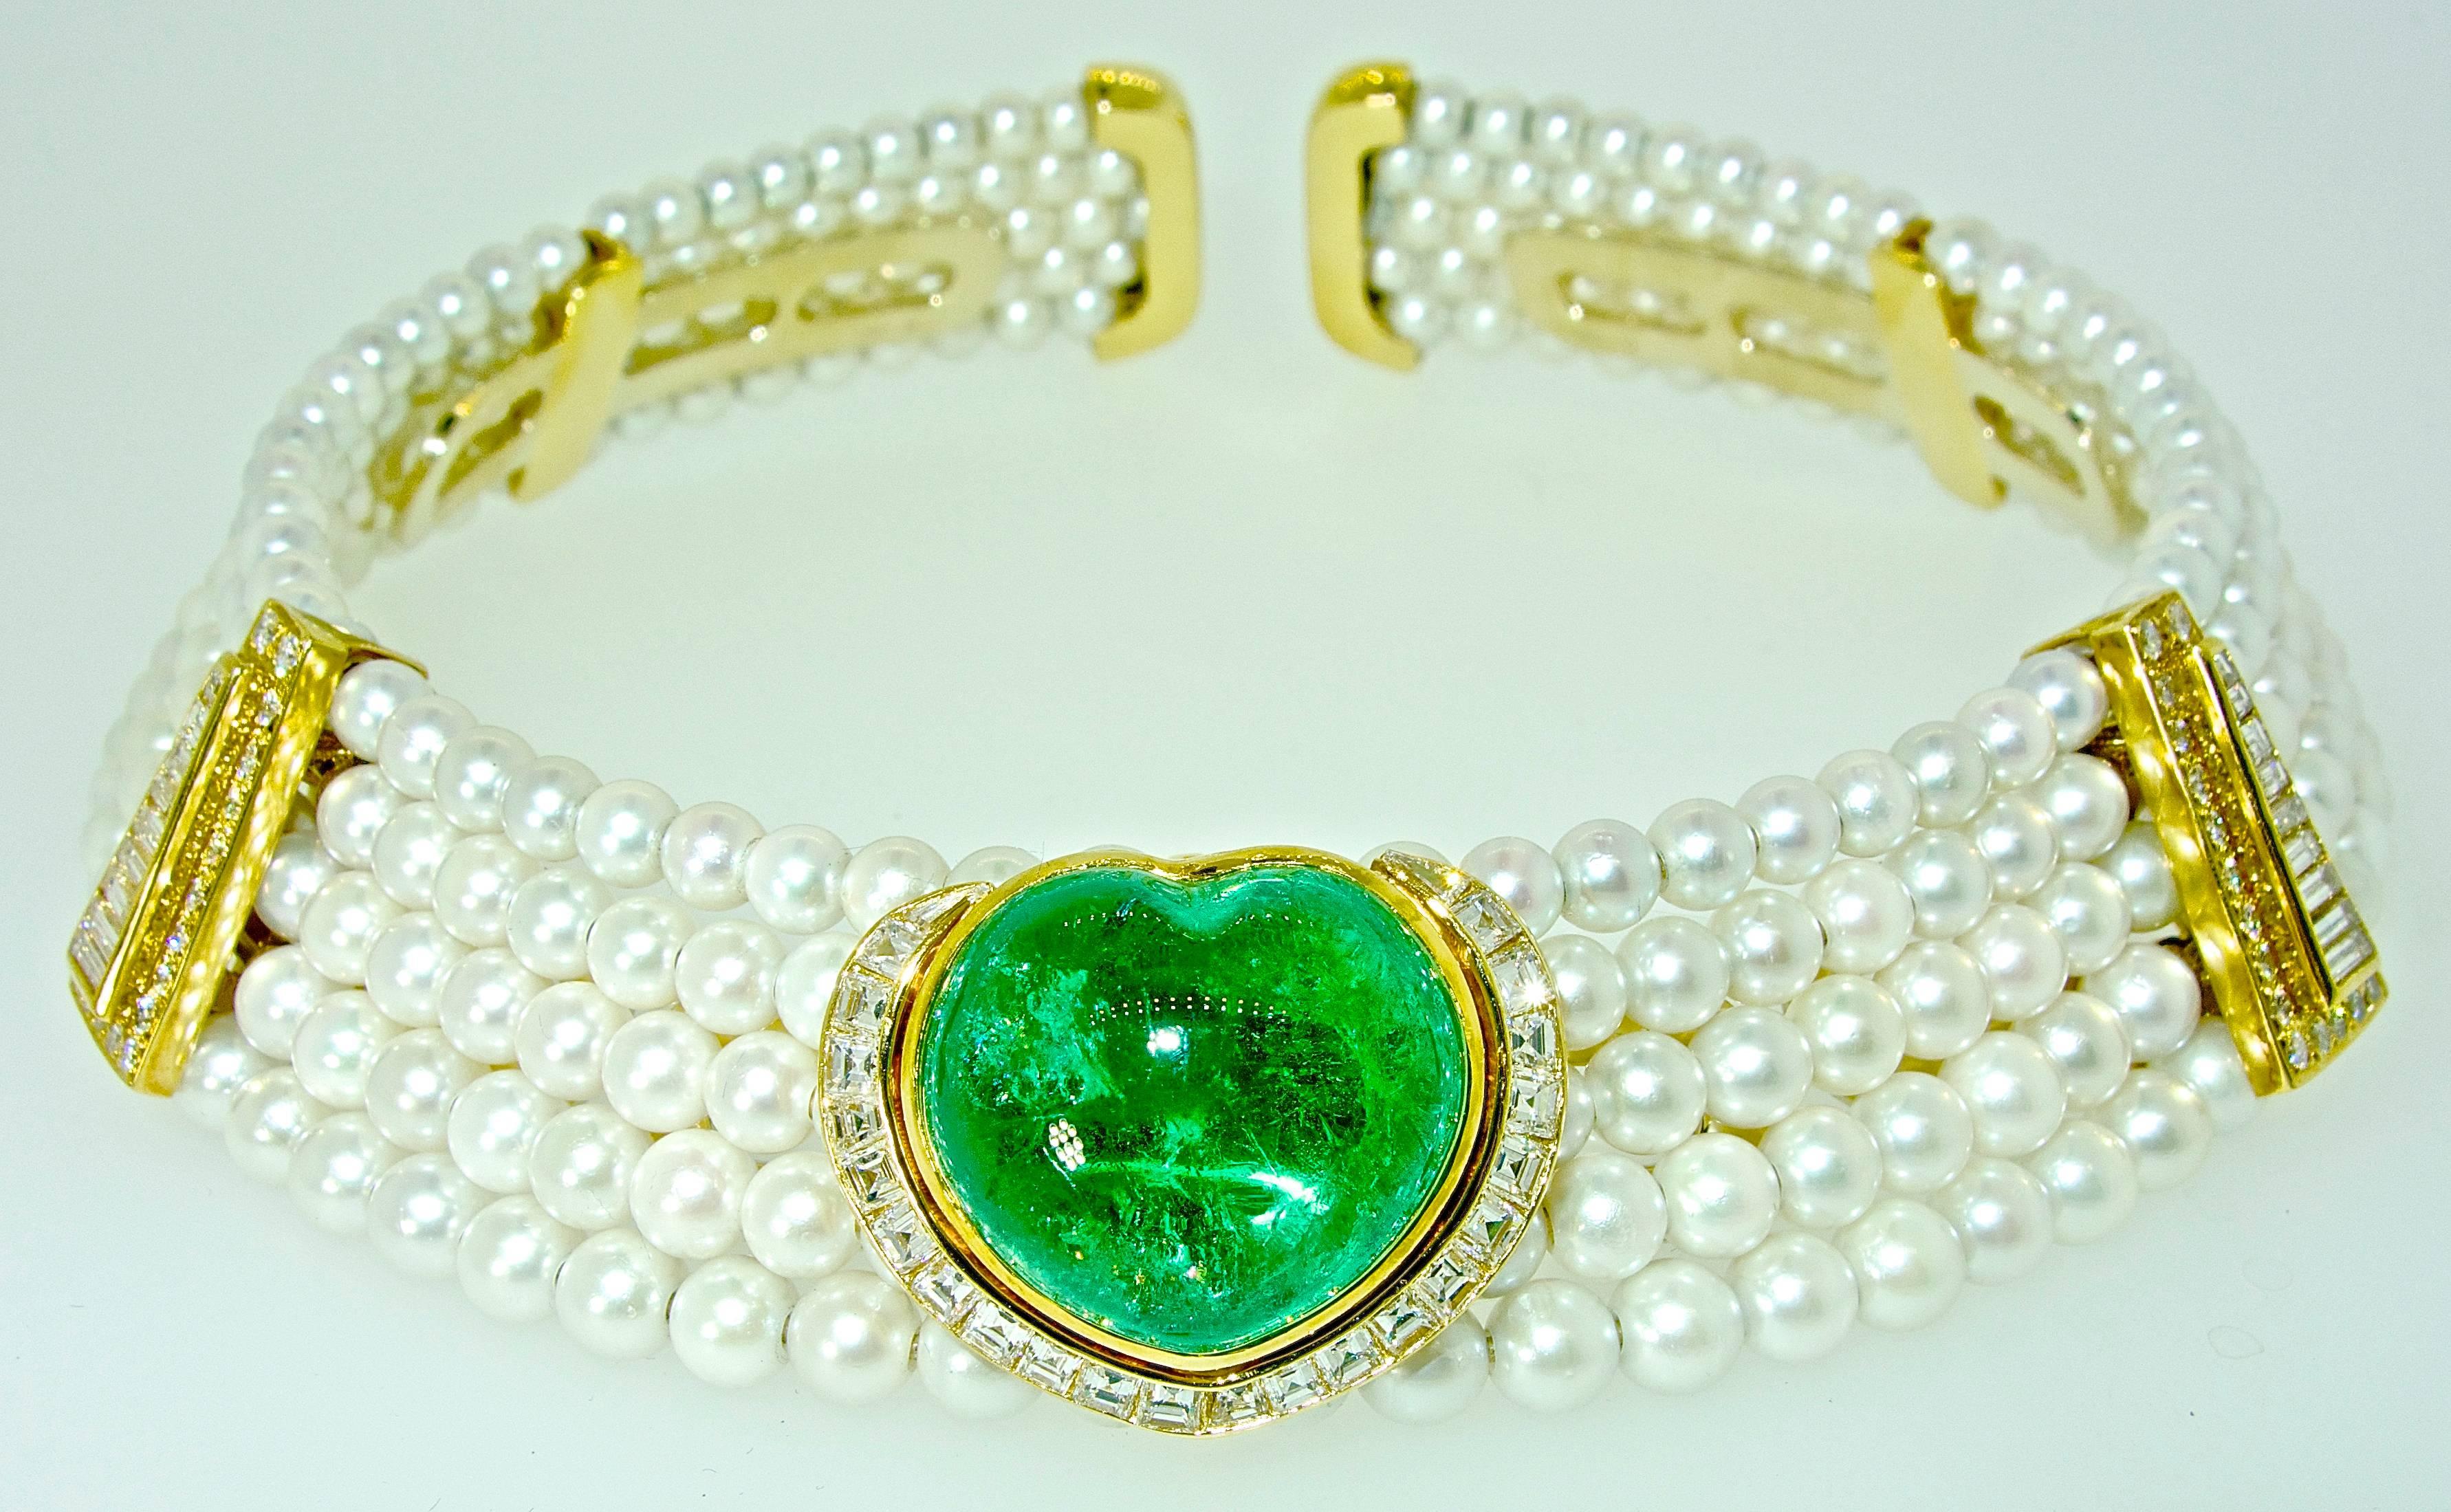 In the style and workmanship, of the great designer Marina B. (but not signed), this striking necklace centers an important fine natural emerald weighs approximately 25+ cts.   This natural large emerald is probably Colombian and displays a pleasing